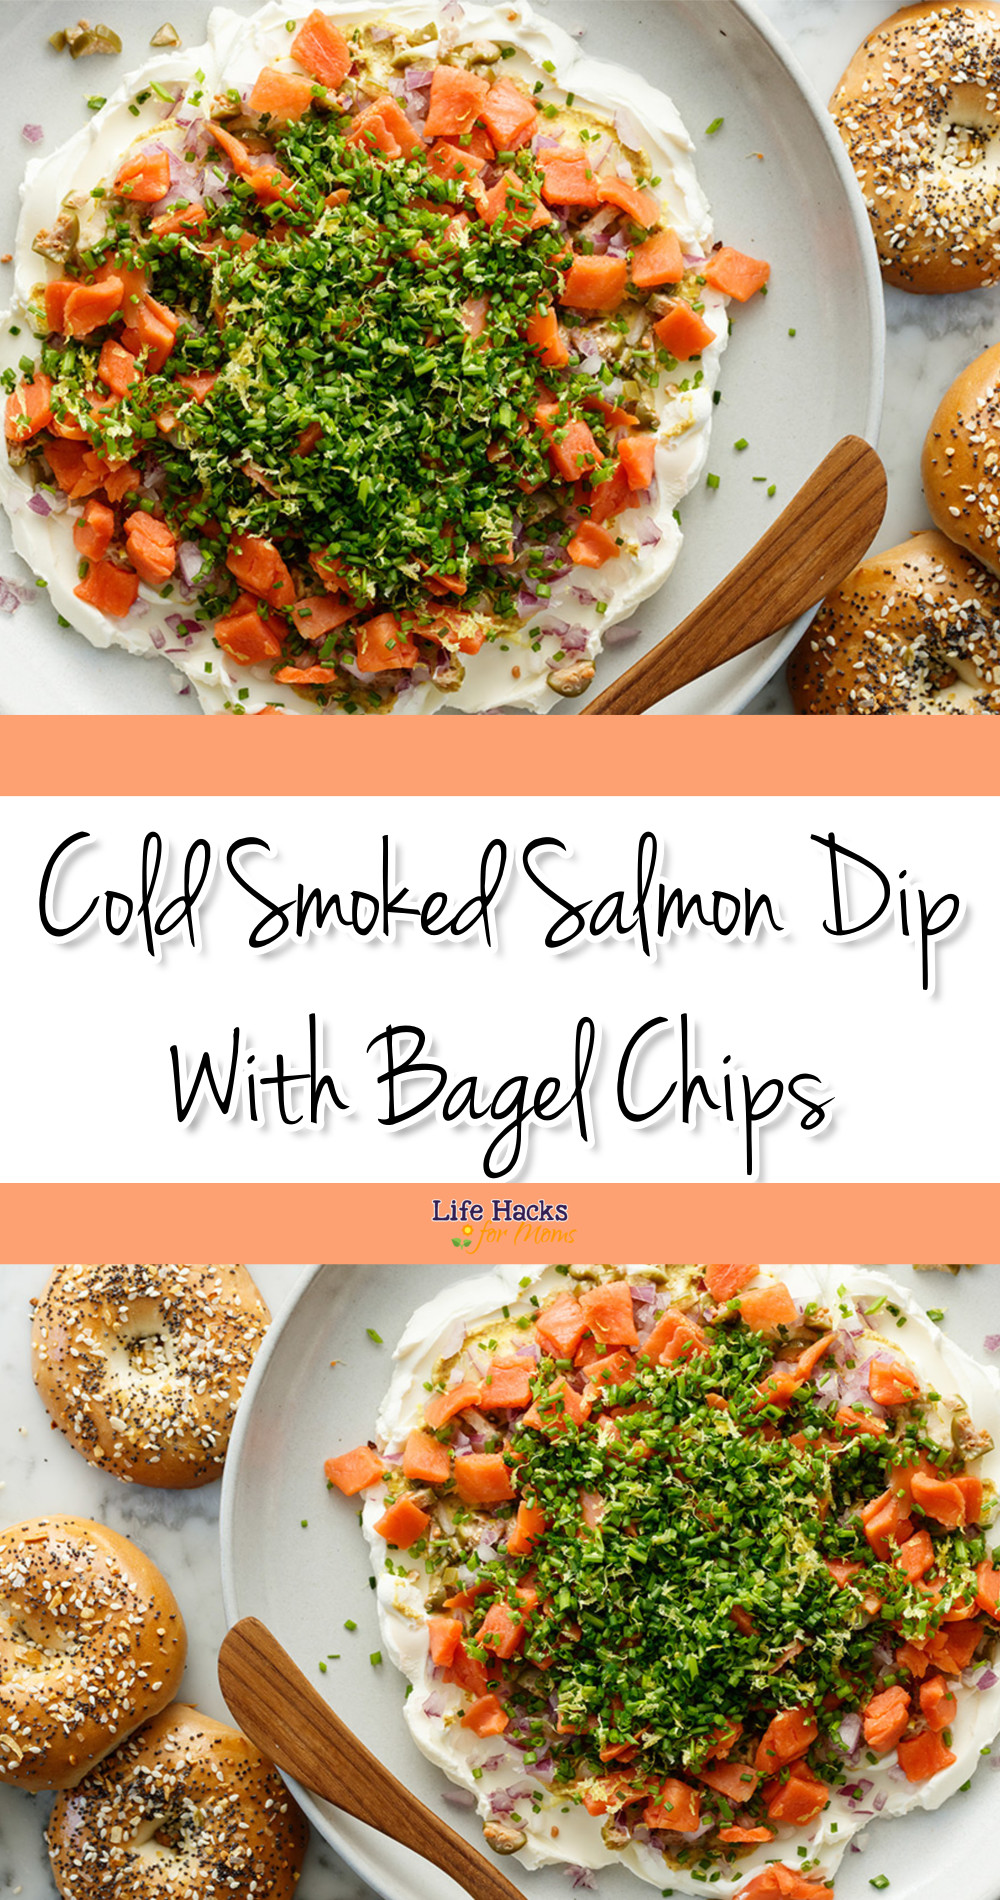 Cold Smoked Salmon Dip With Bagel Chips